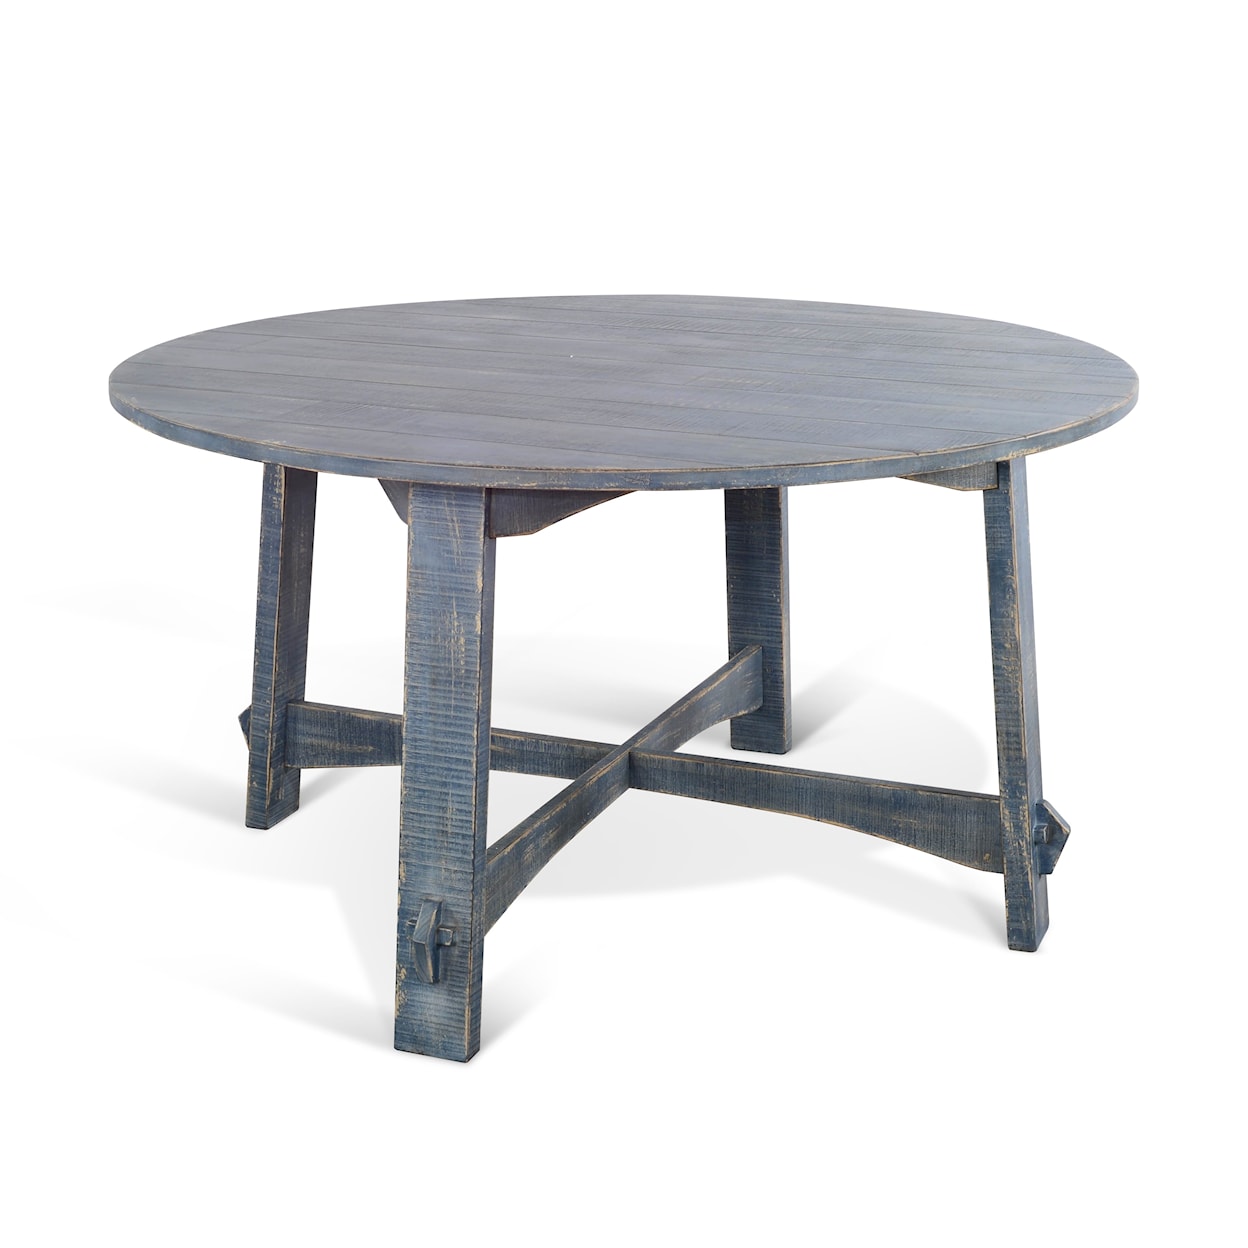 Sunny Designs Marina Round Dining Table with Trestle Base